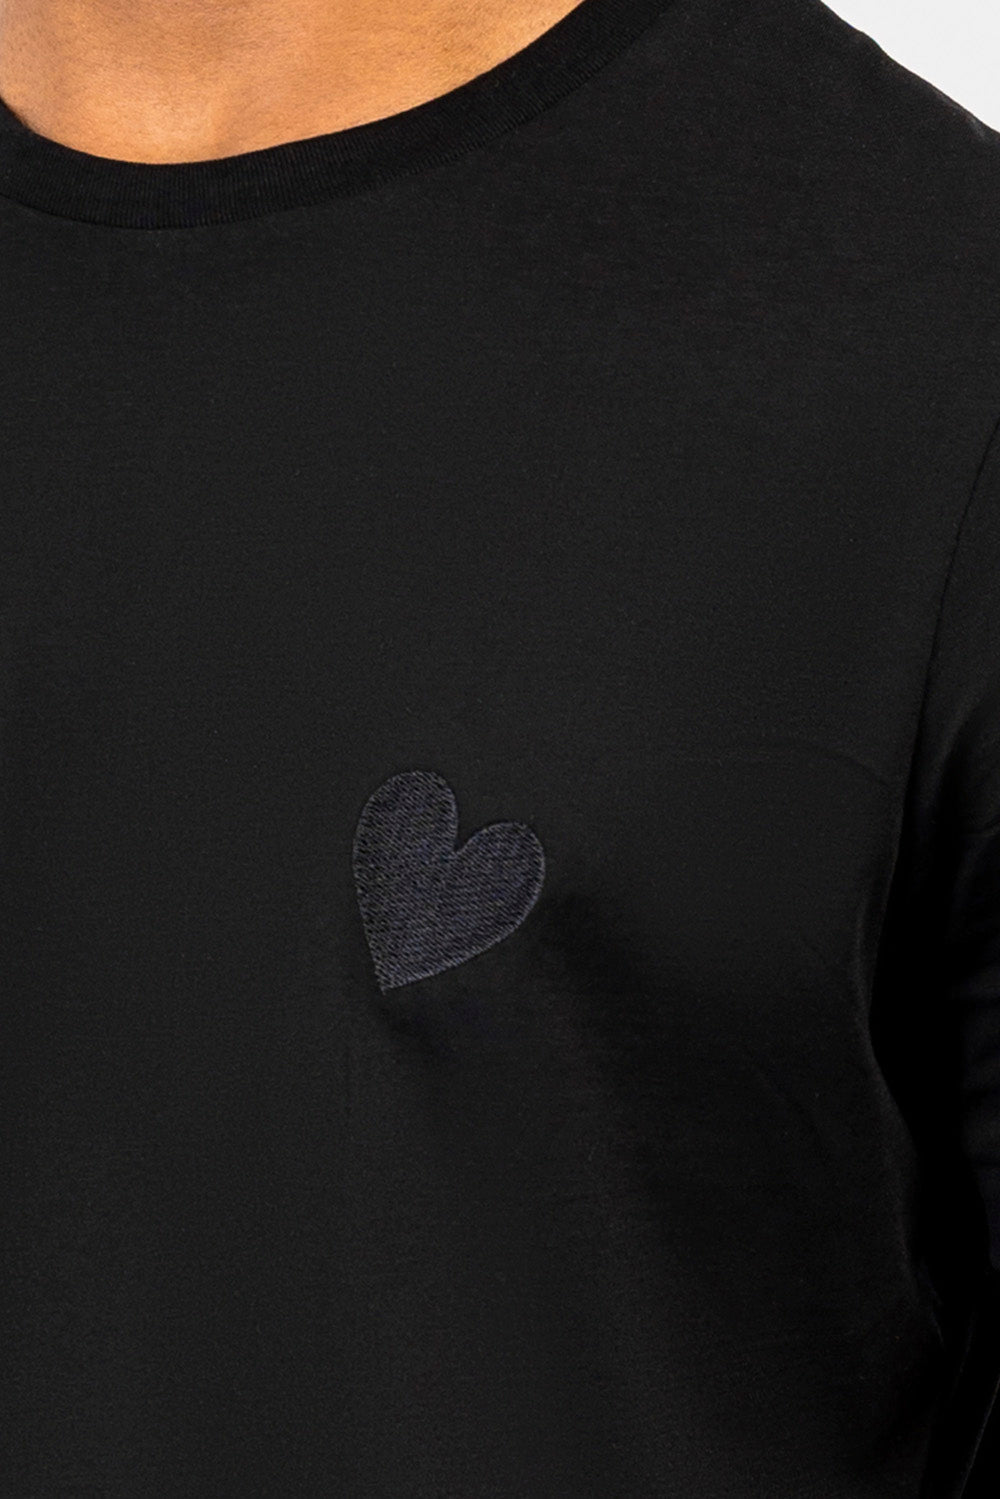 Classic Embroidery Heart Black T-shirt